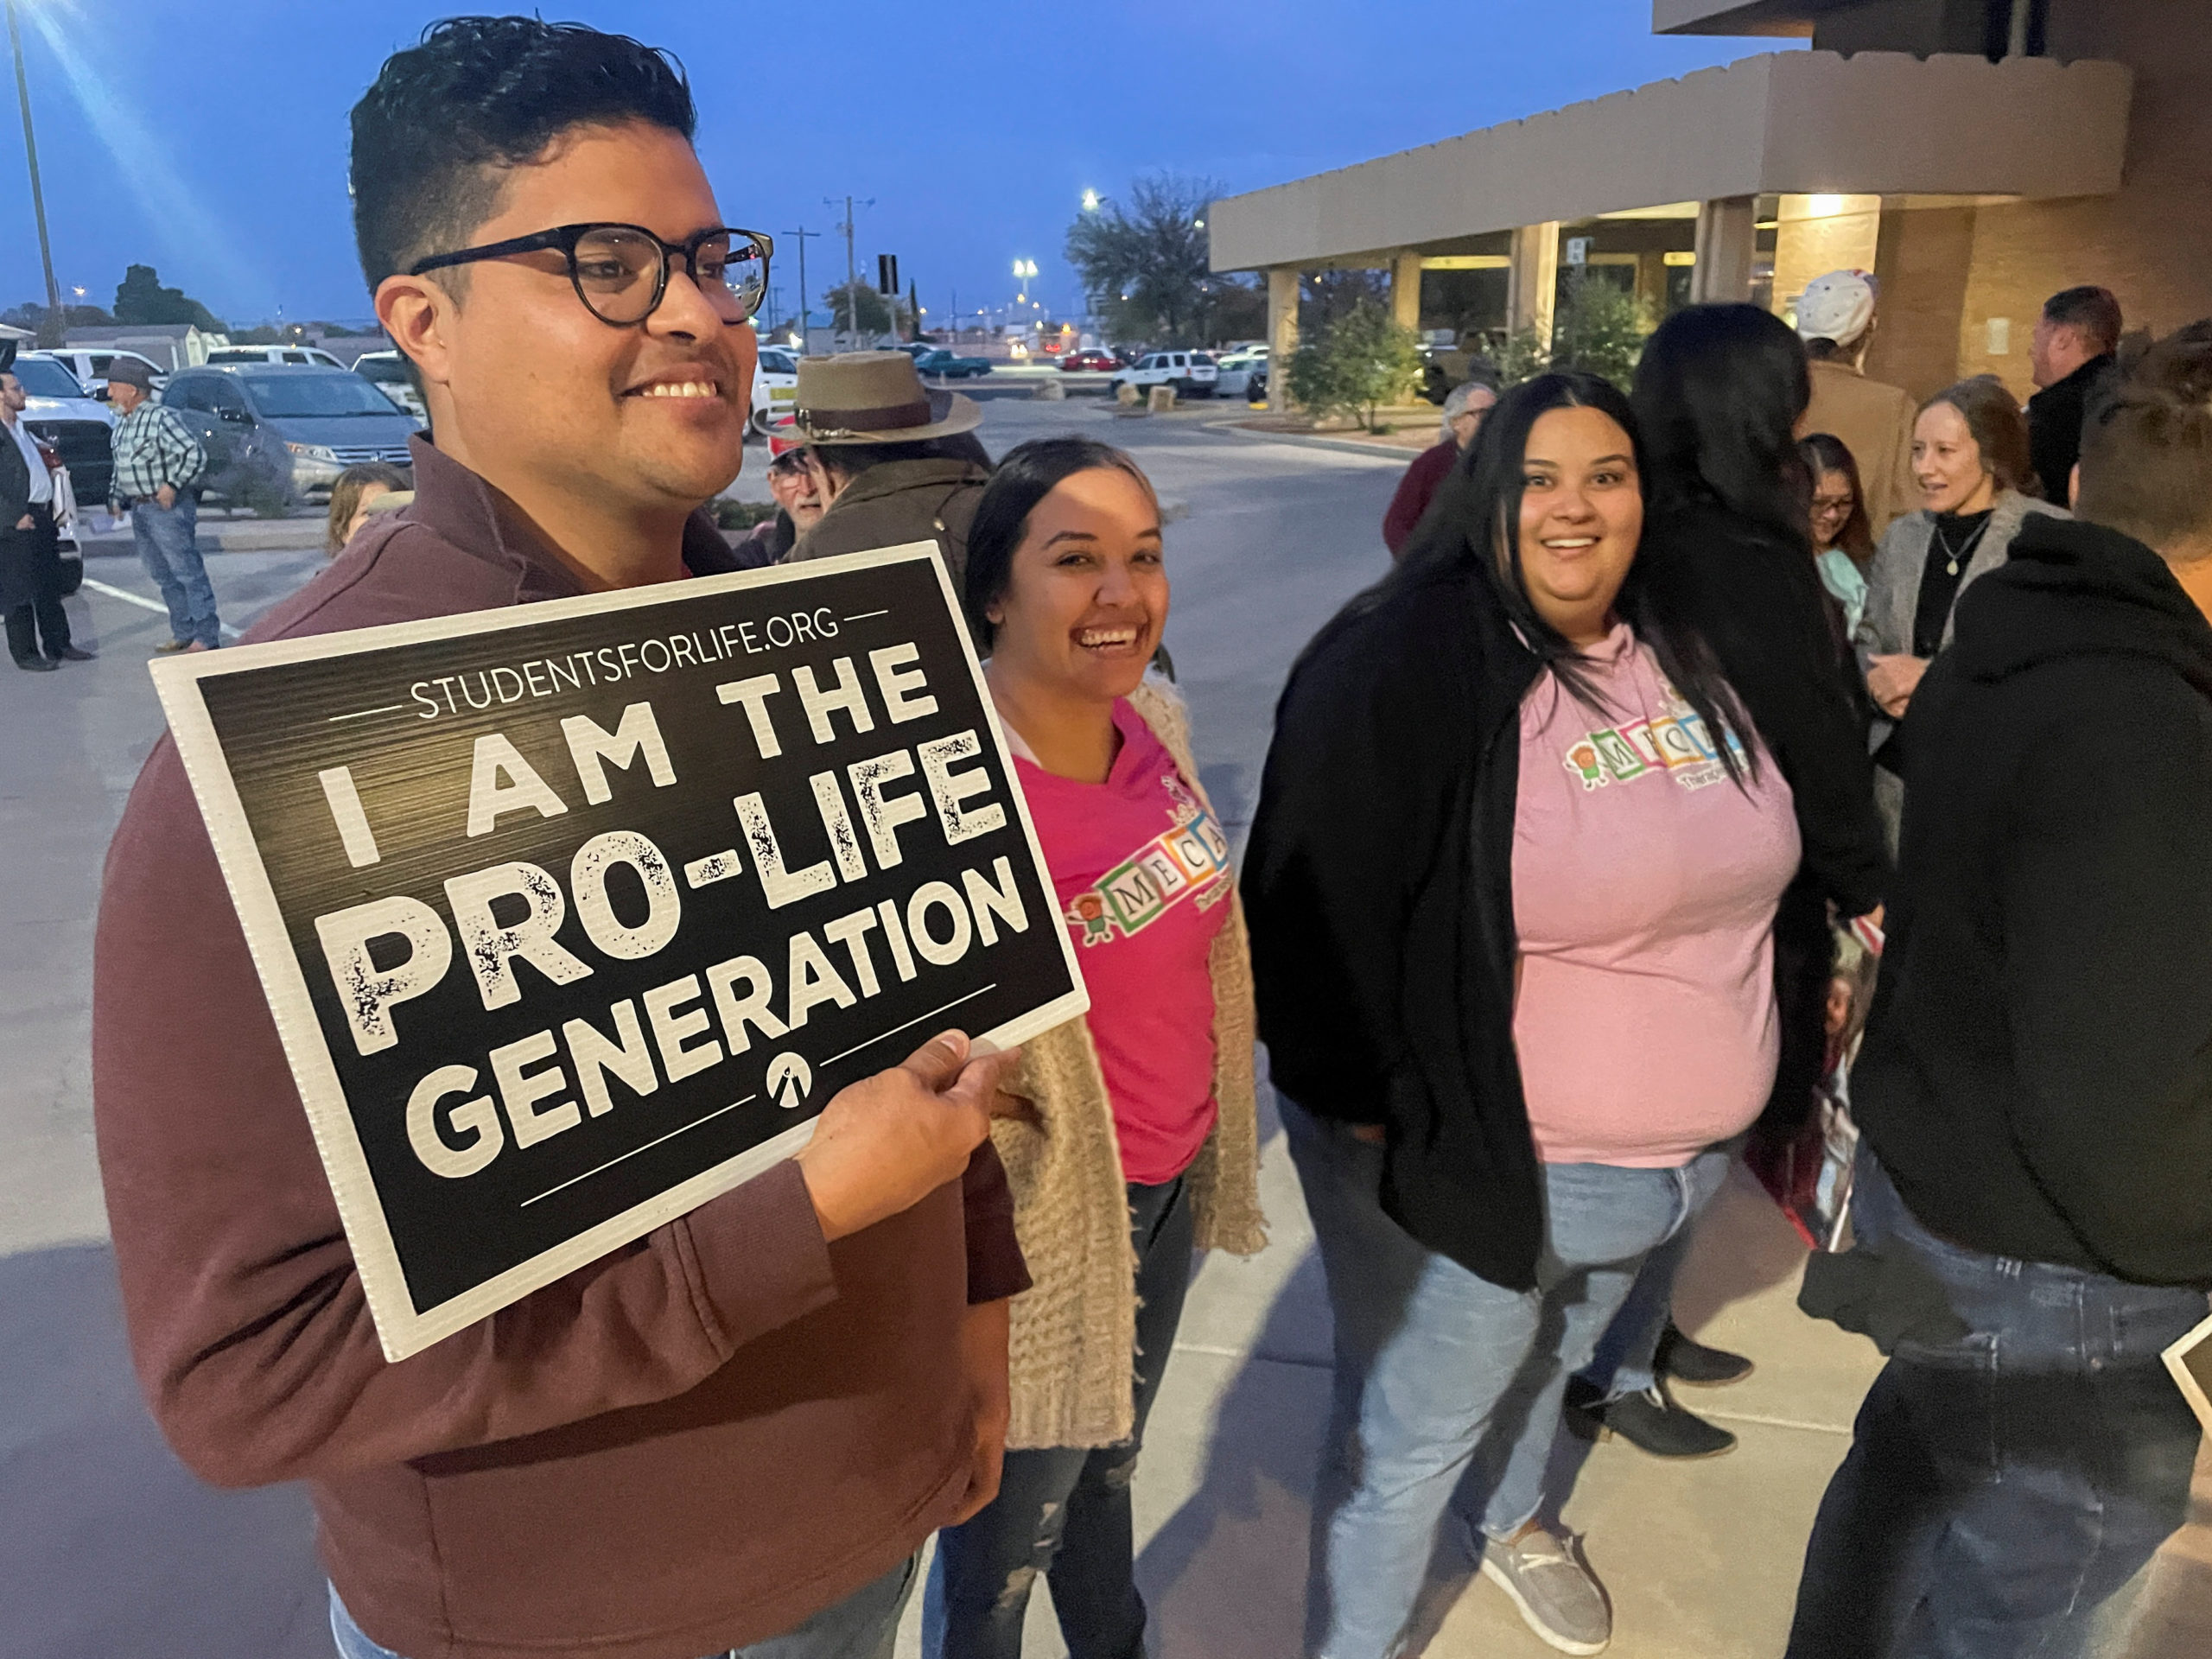 Anti-abortion activists rally ahead of a city commission meeting in Hobbs, New Mexico, U.S. November 7, 2022. REUTERS/Brad Brooks